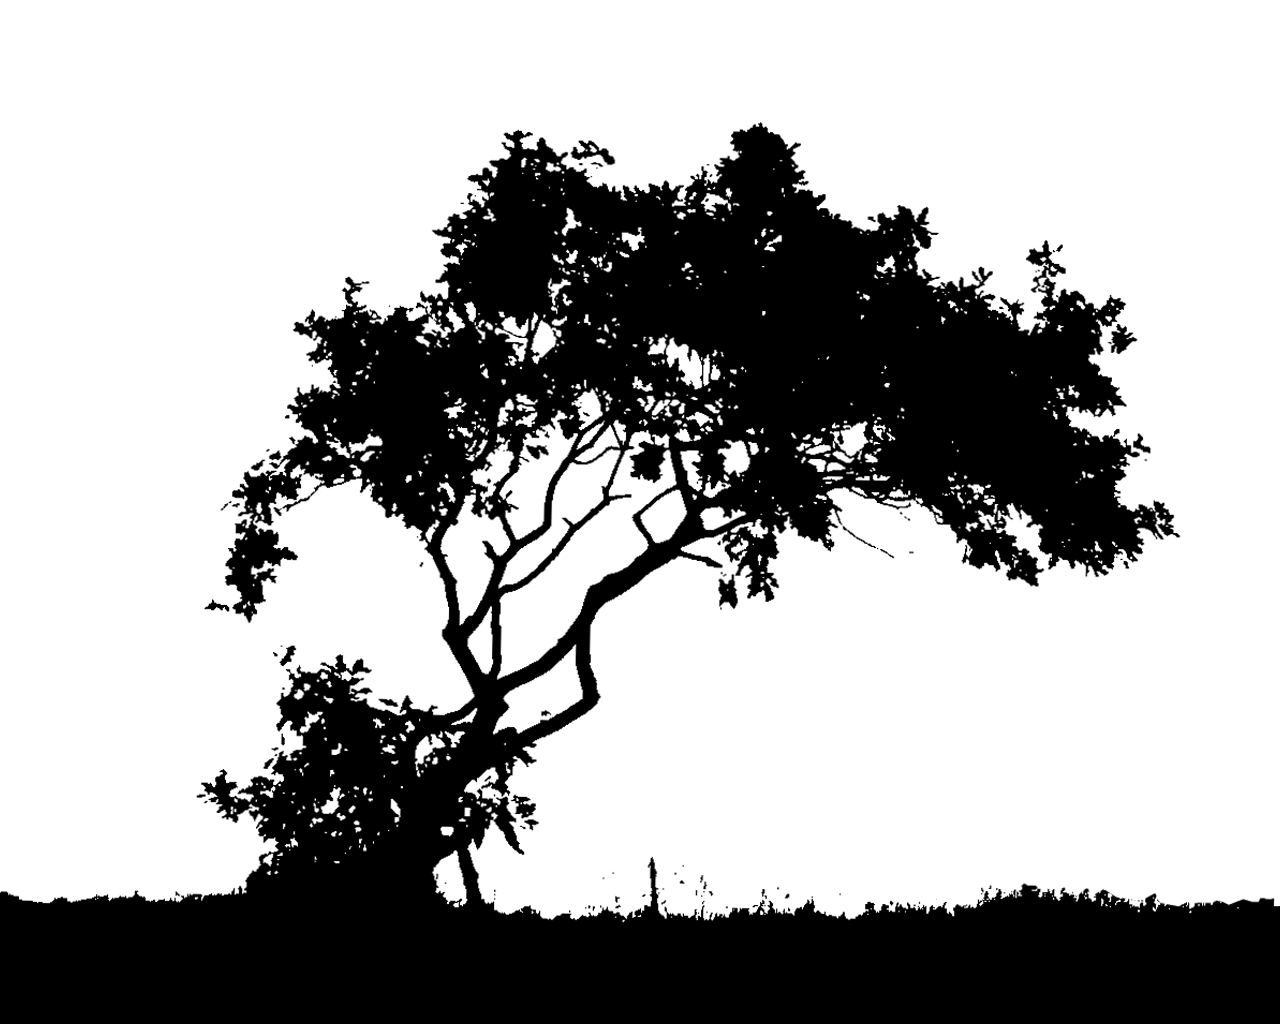 Details 75+ black and white tree wallpaper best - in.cdgdbentre